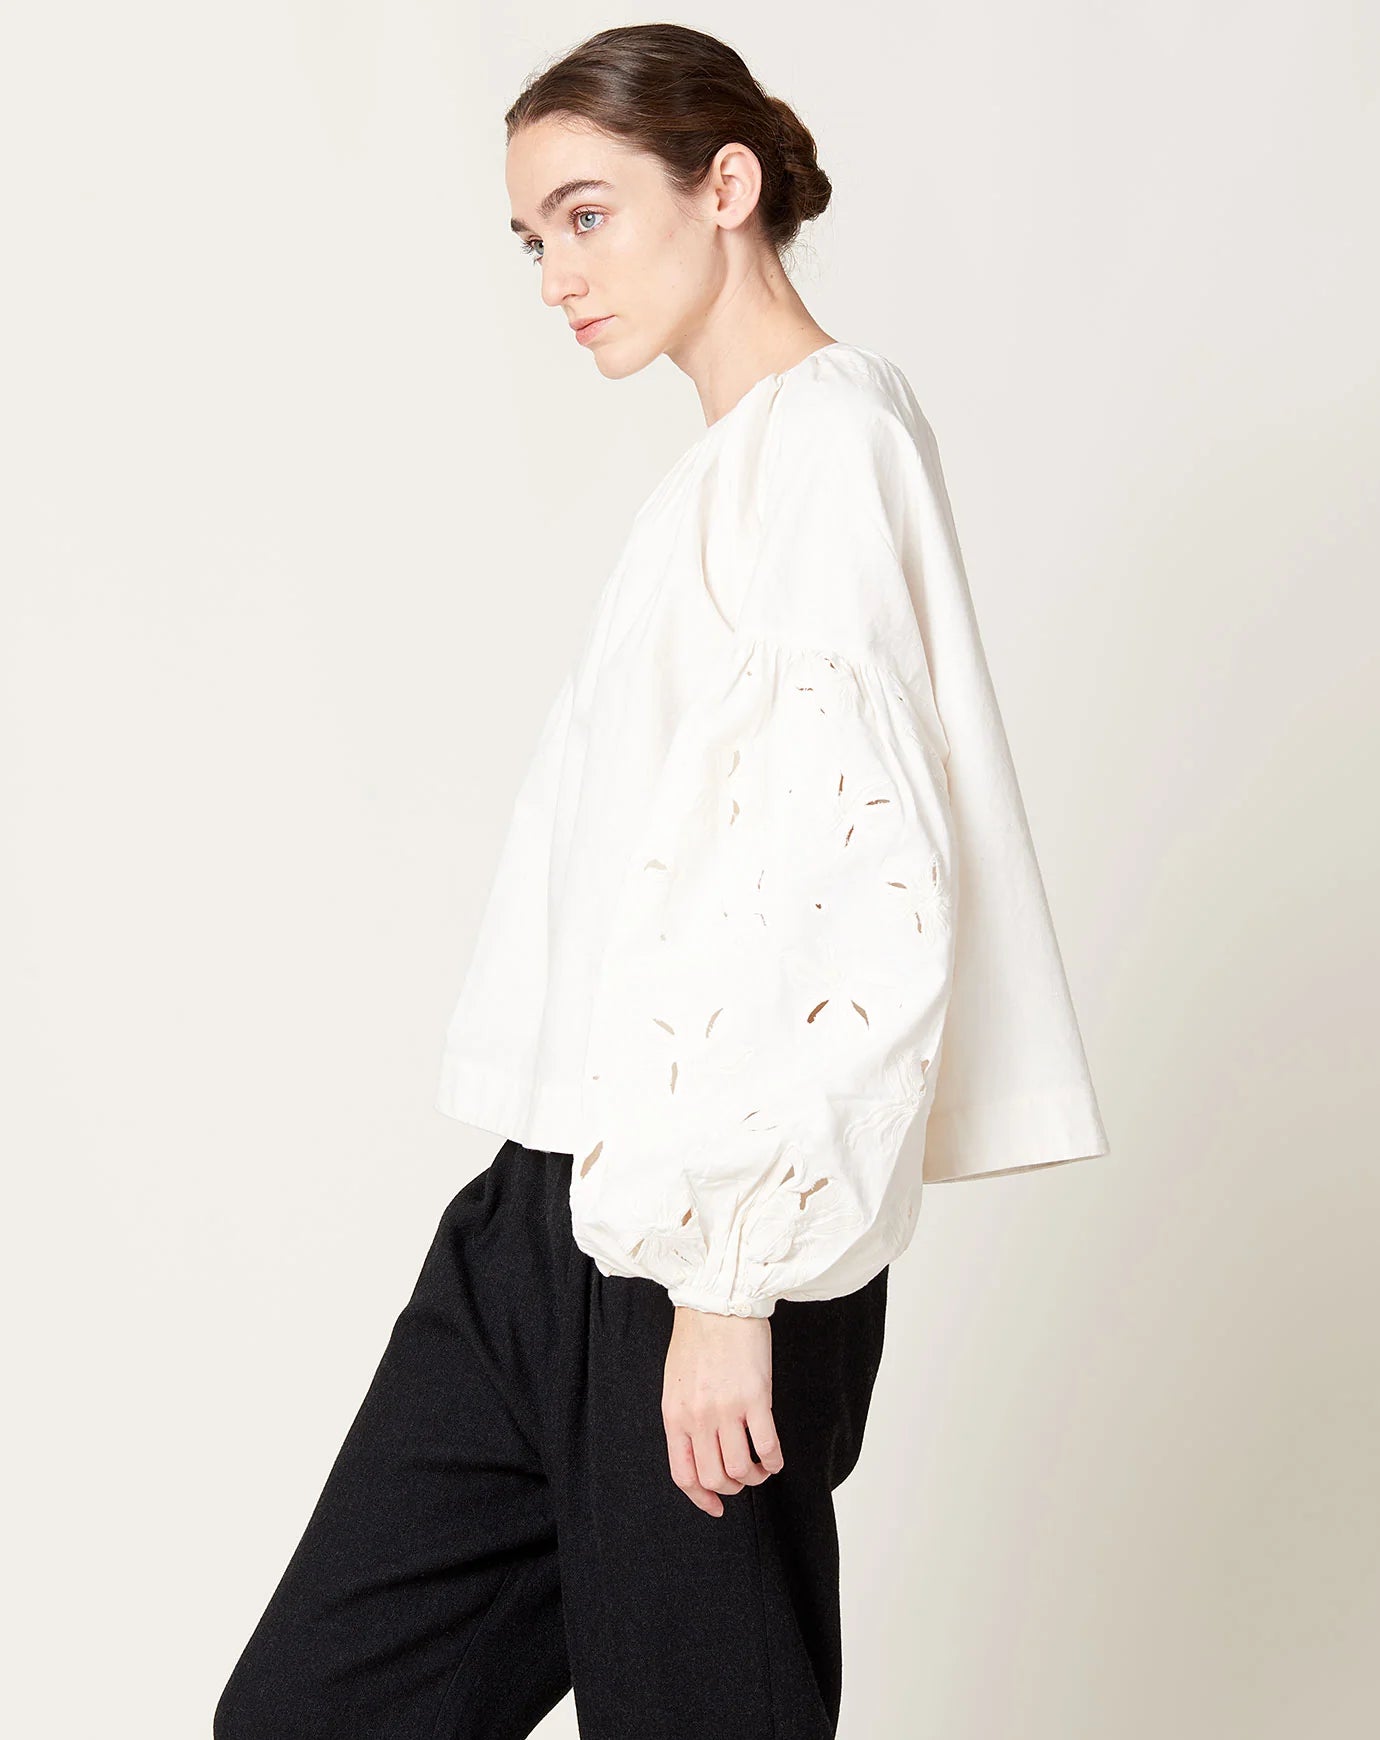 HARLOW BLOUSE OFF-WHITE